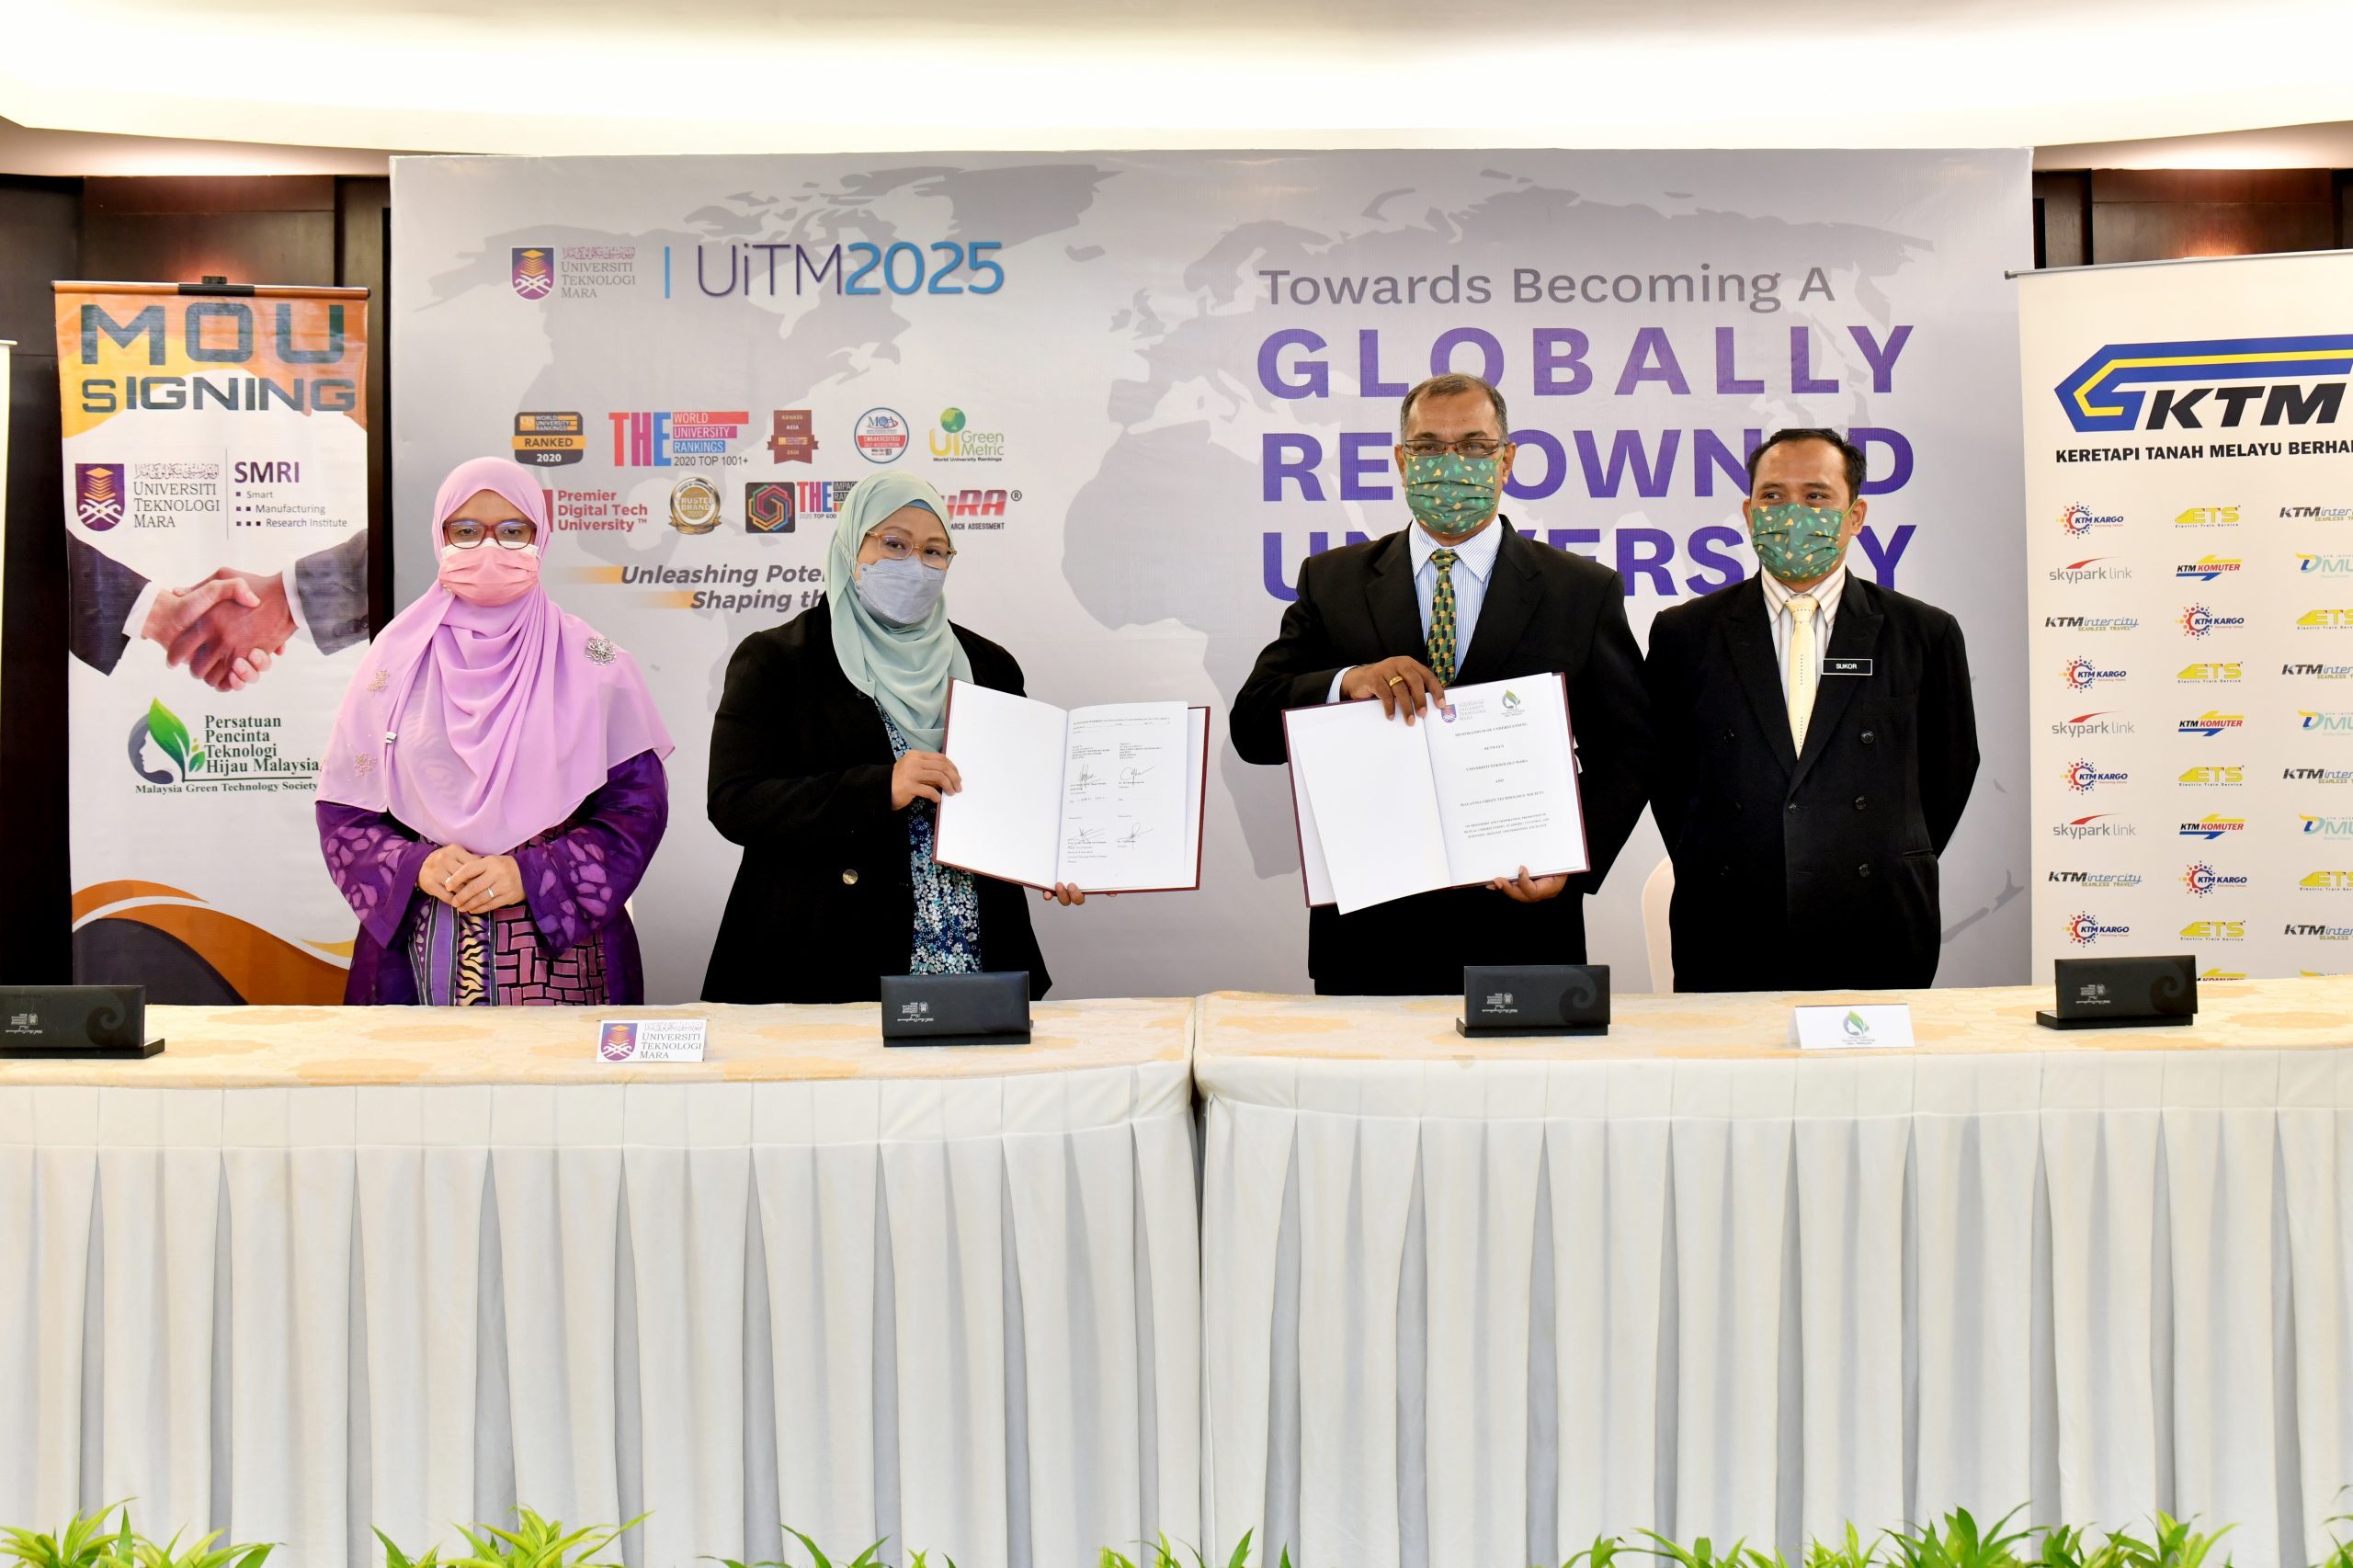 Uitm And Mgts Sign Partnership On Green Technology Uitm News Hub